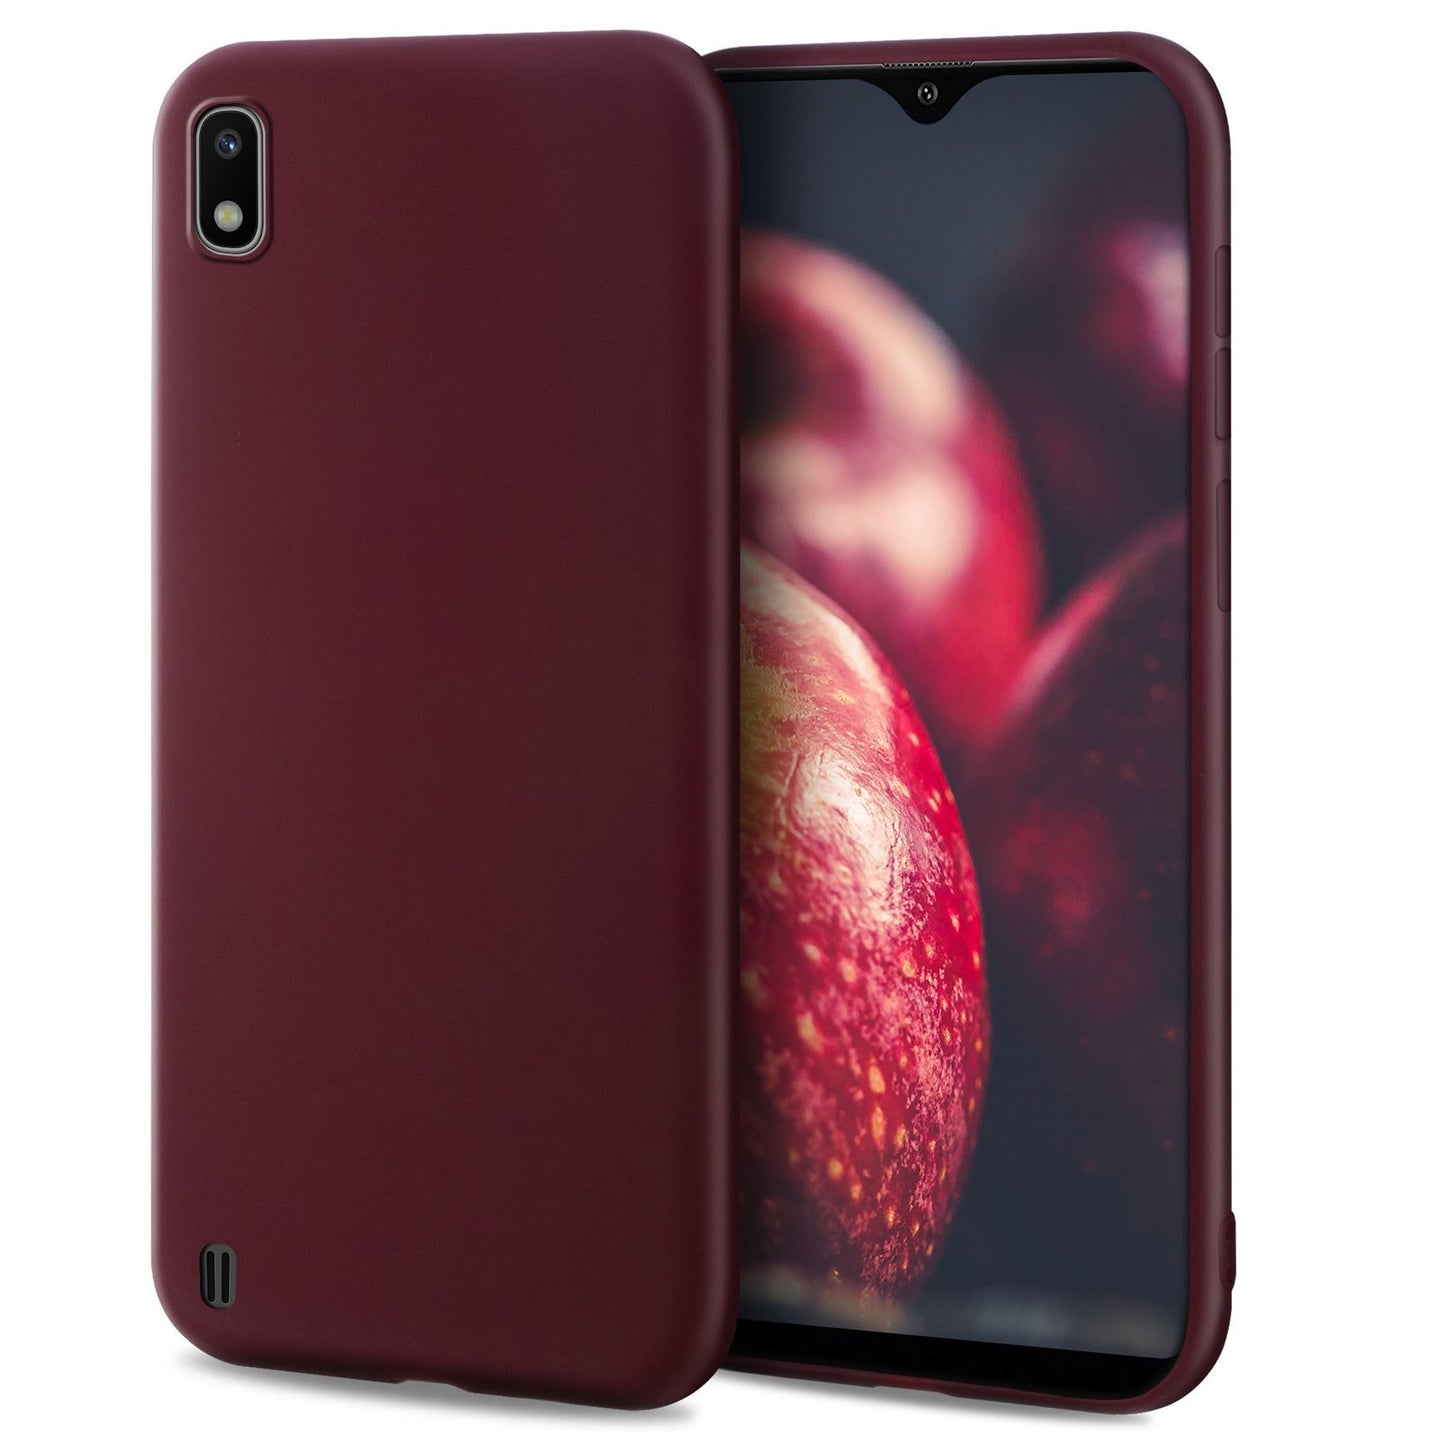 Moozy Minimalist Series Silicone Case for Samsung A10, Wine Red - Matte Finish Slim Soft TPU Cover